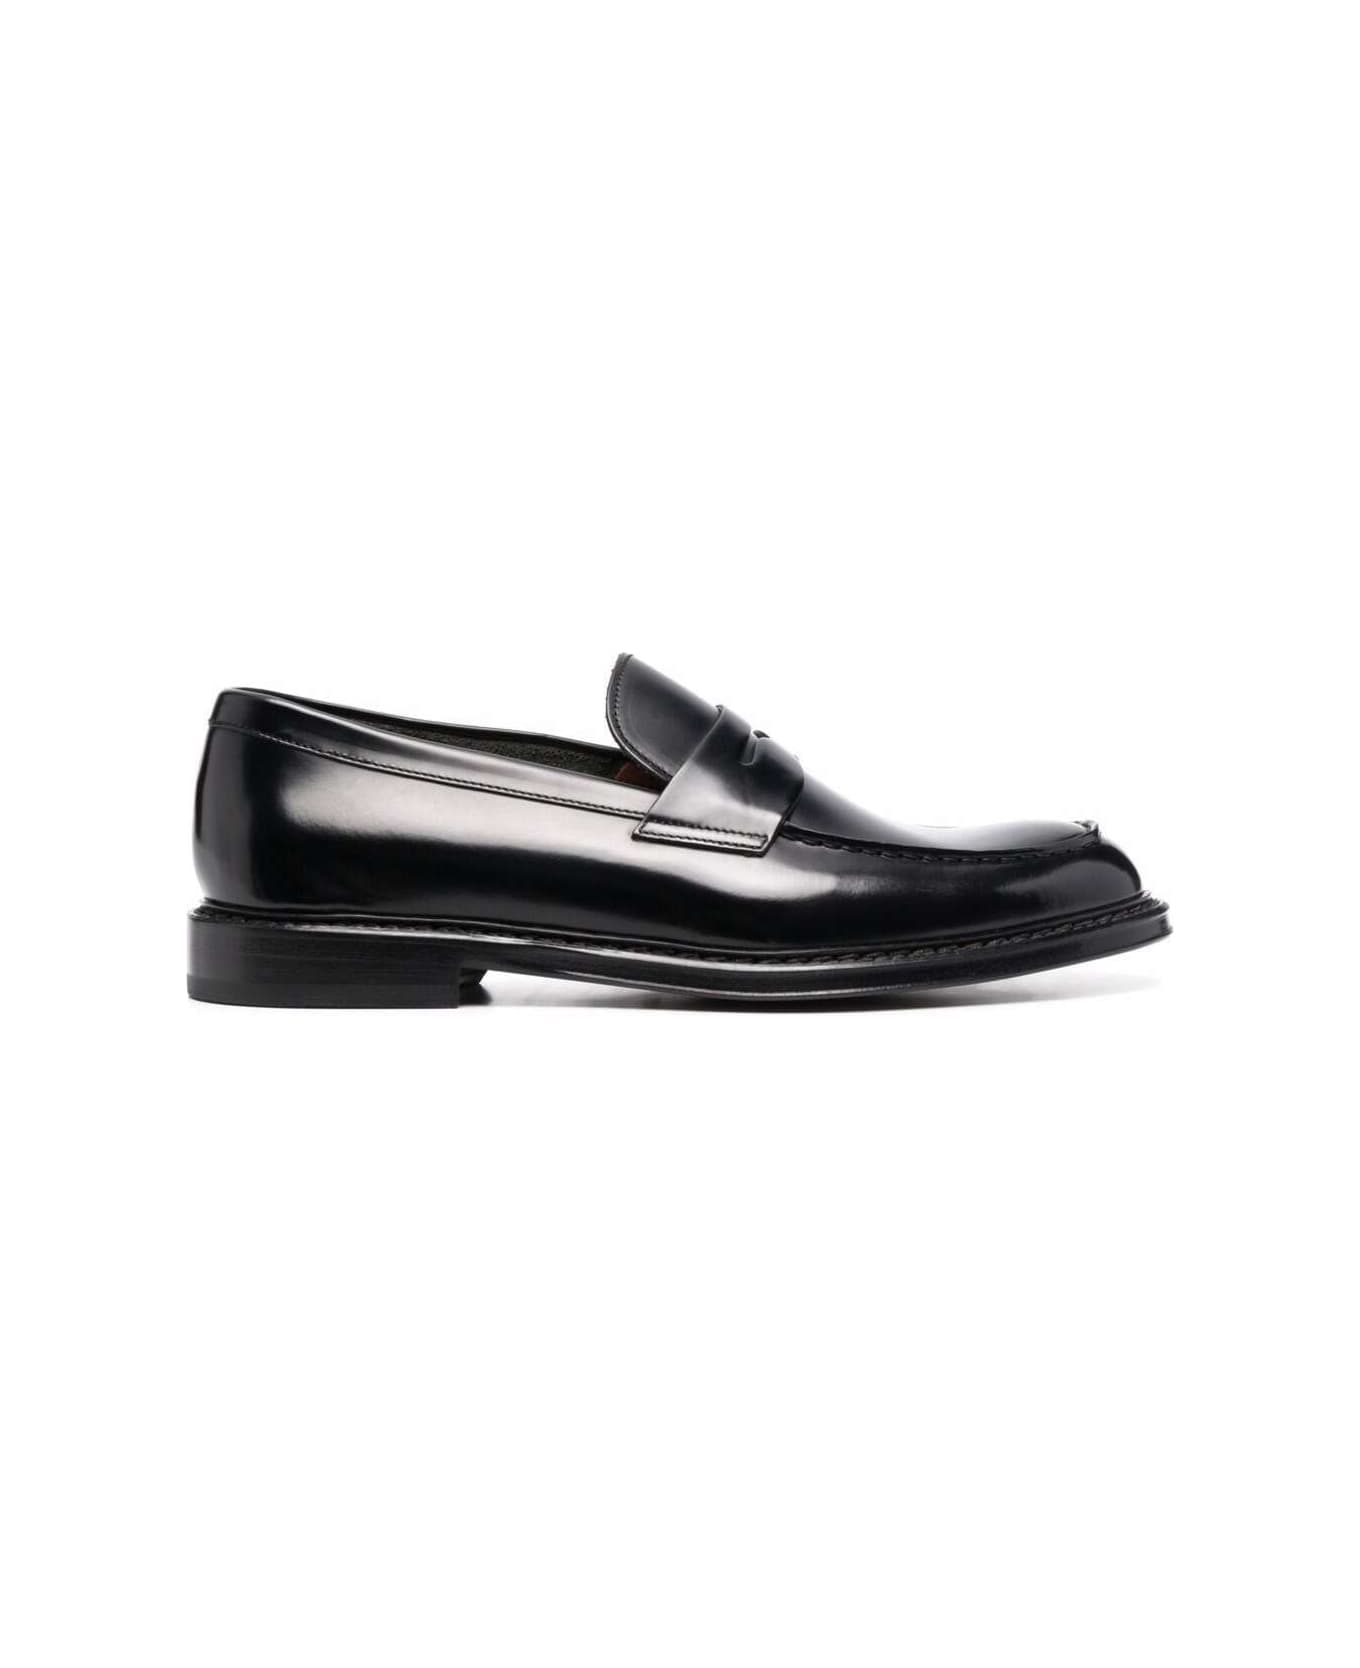 Doucal's Black Slip-on Loafers With Round Toe In Patent Leather Man - Nero